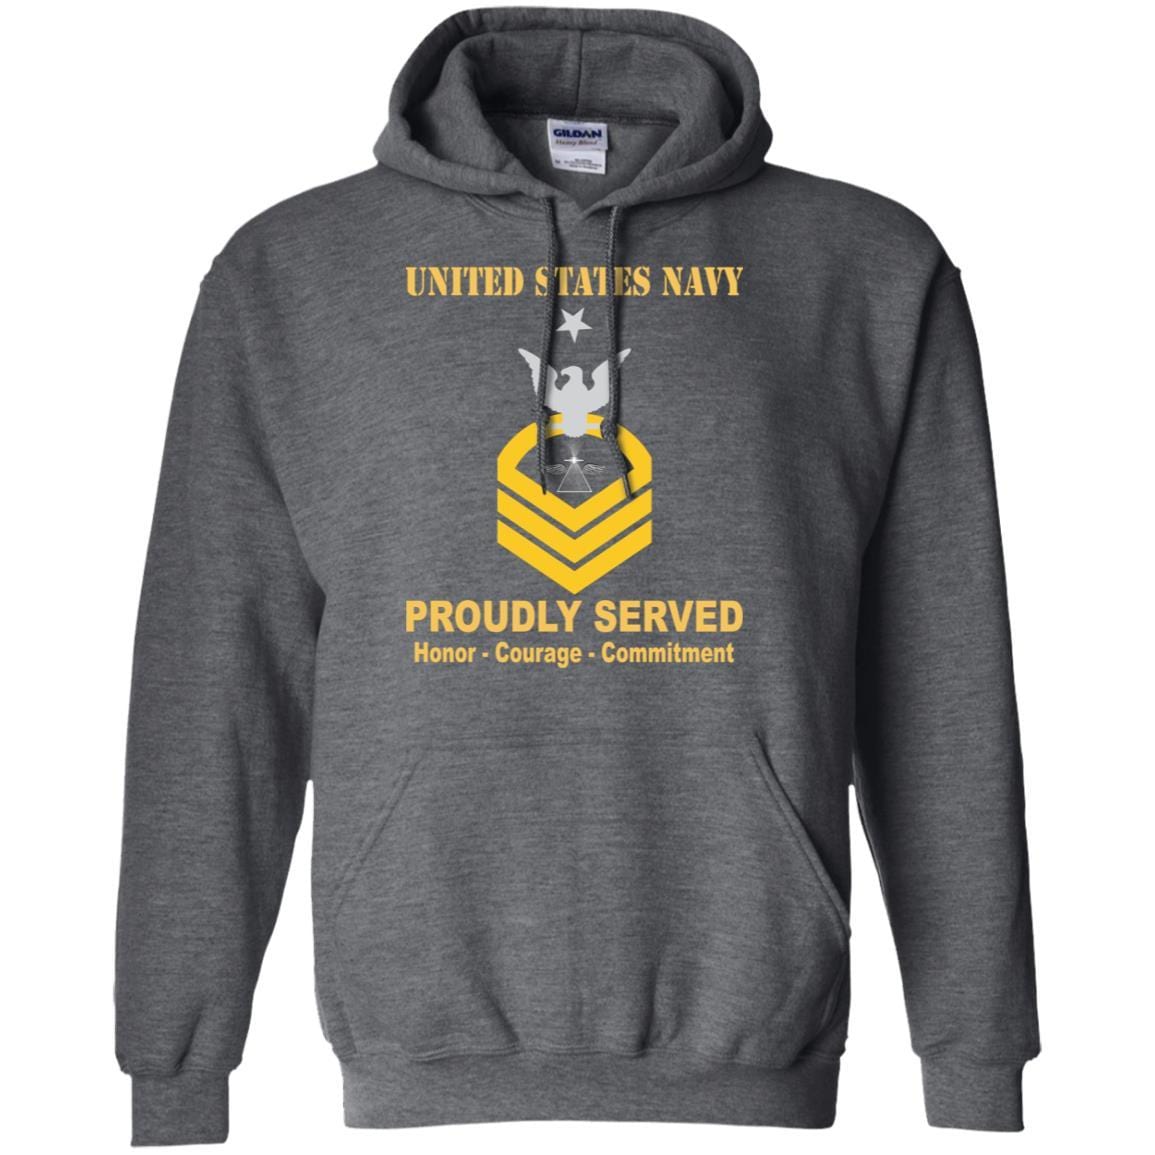 US Navy Photographer's Mate Navy PH E-8 Rating Badges Proudly Served T-Shirt For Men On Front-TShirt-Navy-Veterans Nation